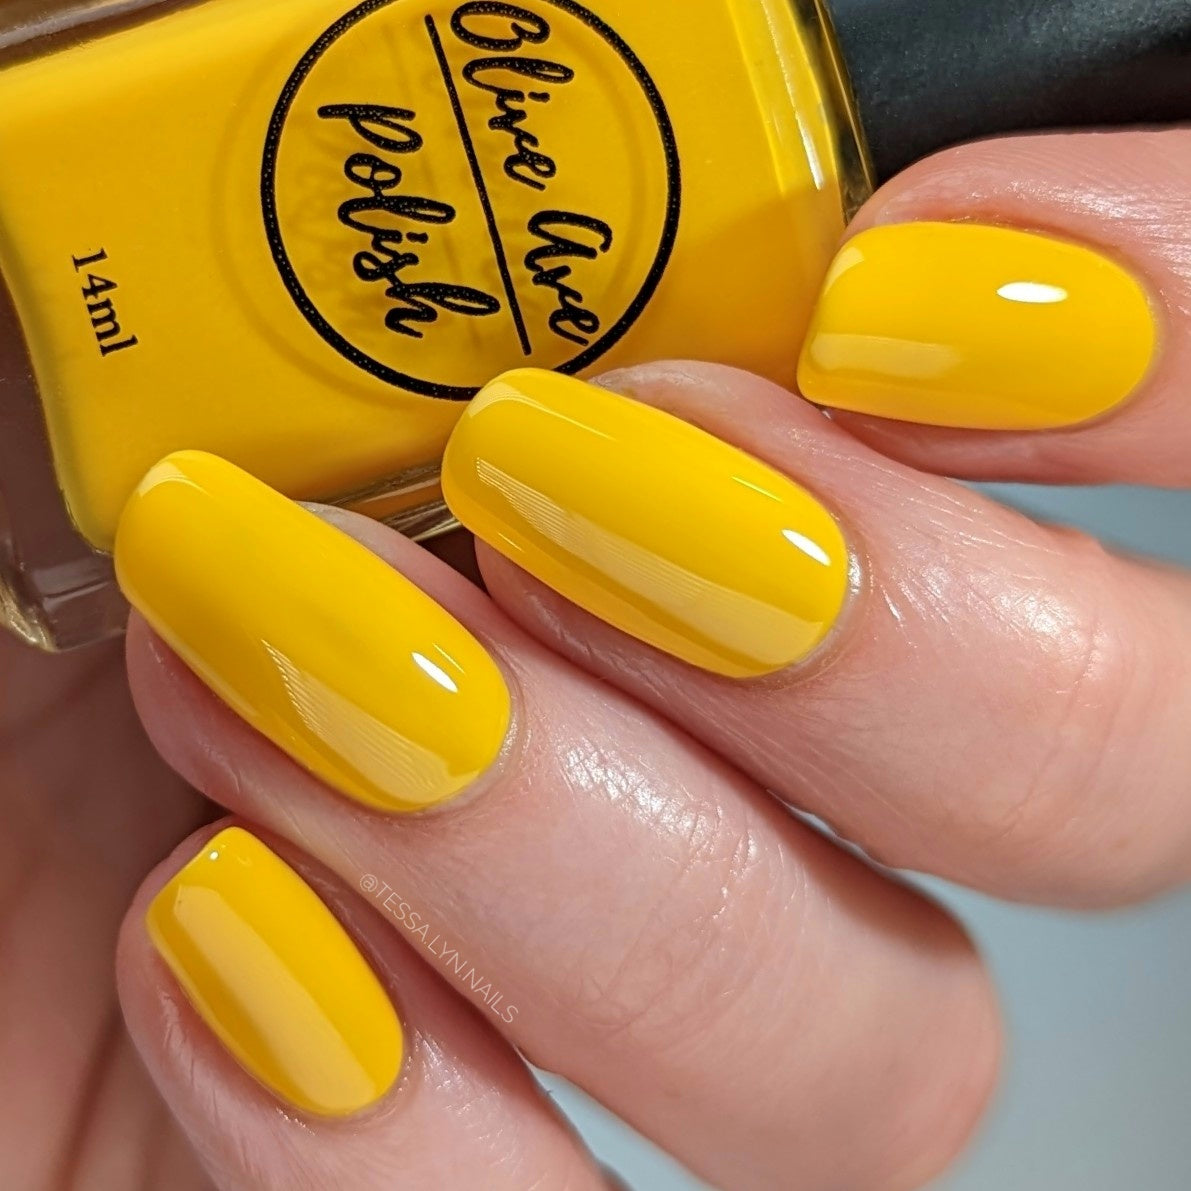 Check Out This Pretty Yellow Nail Paint! | LBB